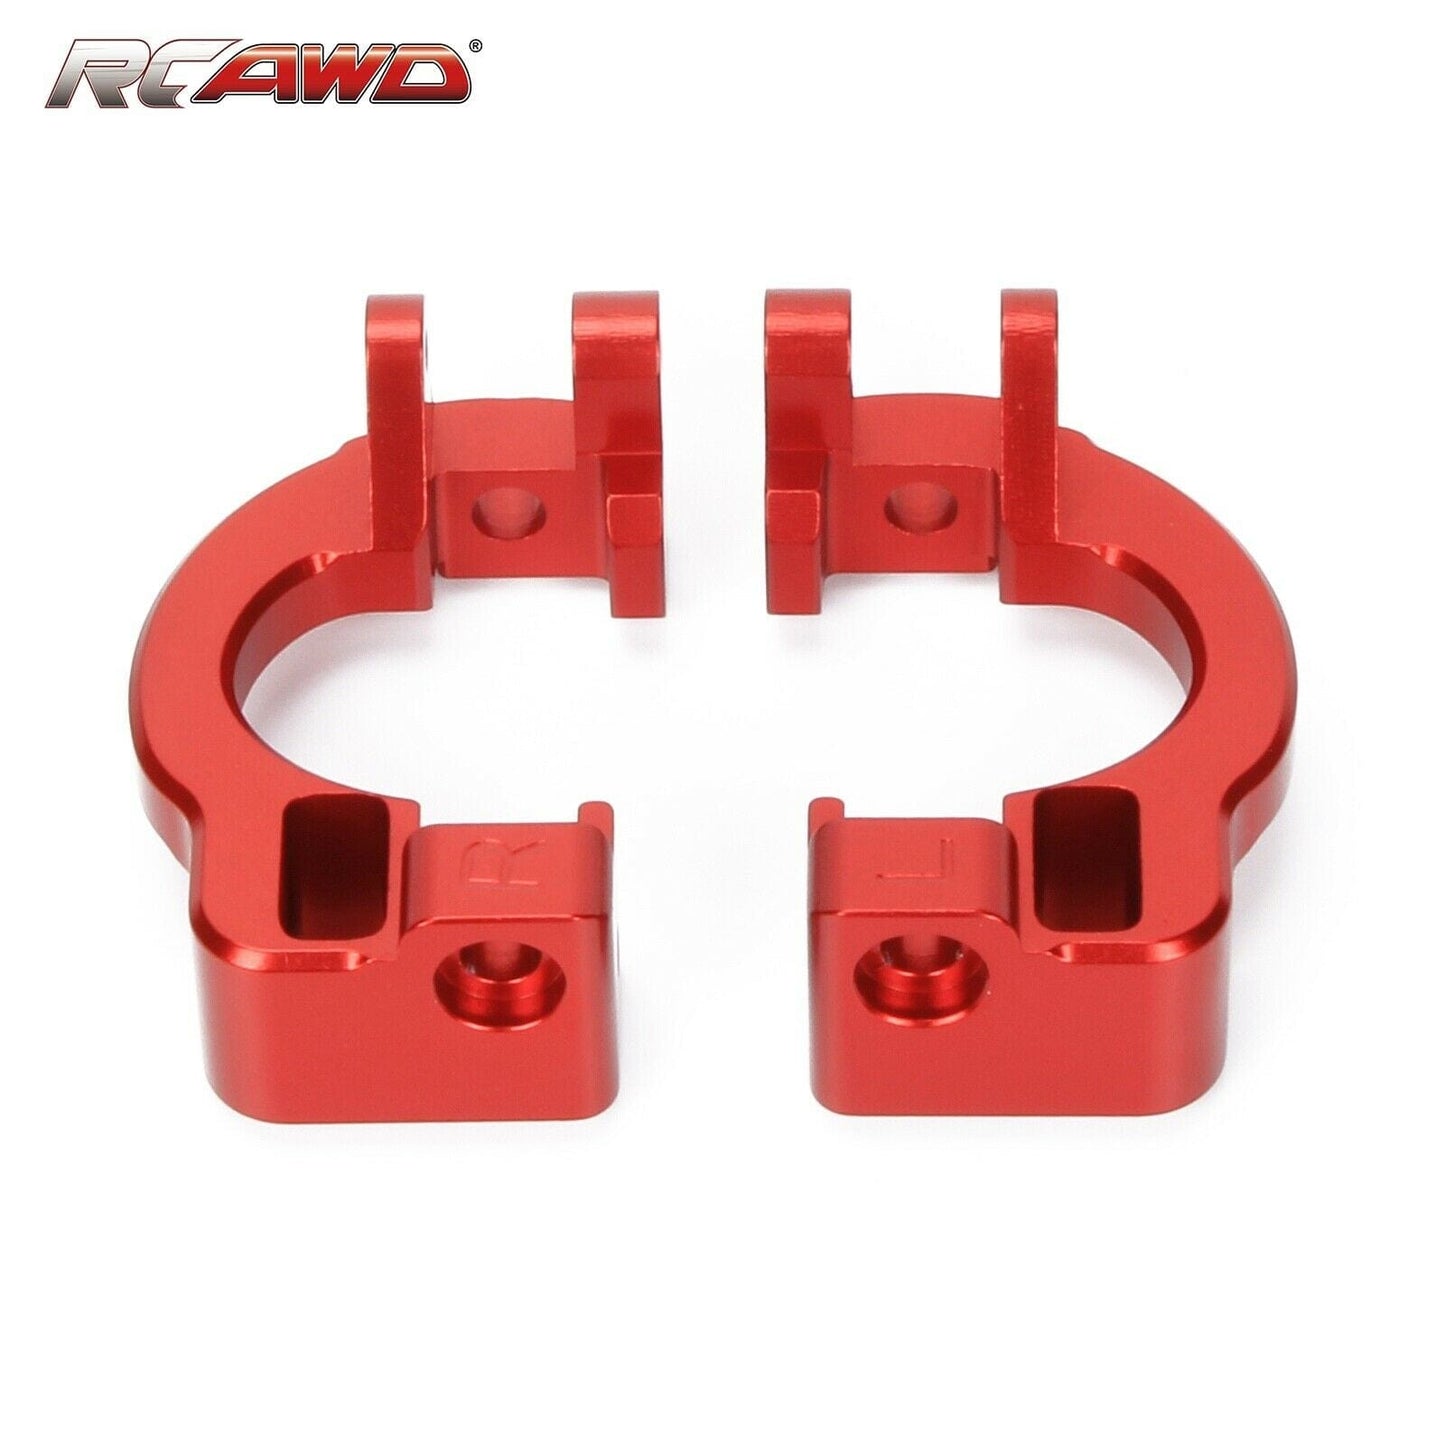 RCAWD RCAWD ARRMA 3S Vendetta Infraction Alloy C Hub Carrier